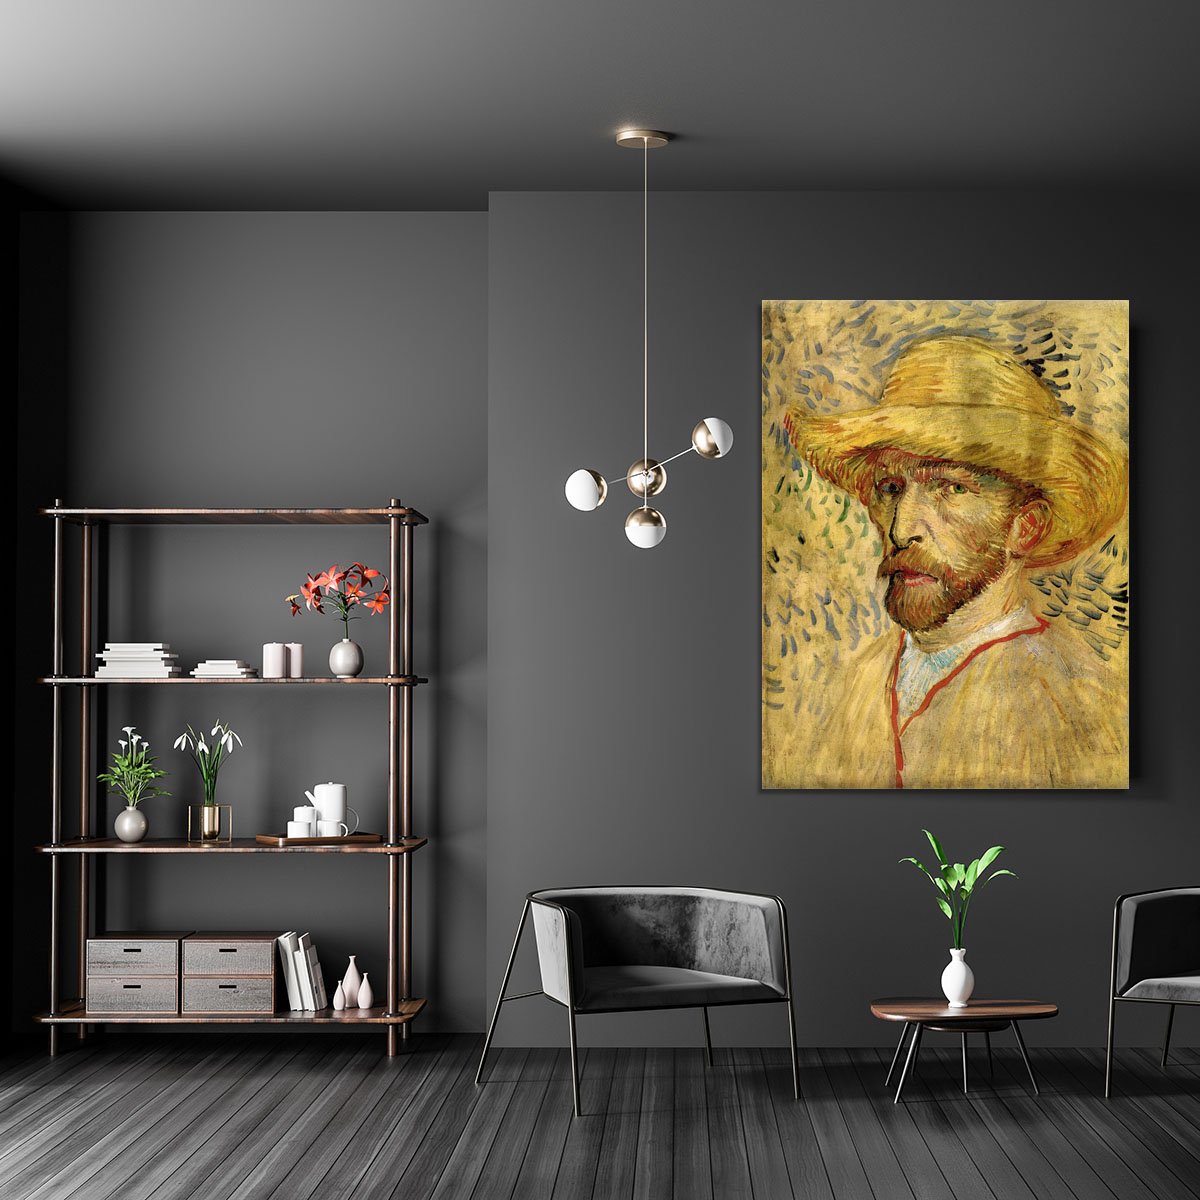 Self-Portrait with Straw Hat 2 by Van Gogh Canvas Print or Poster